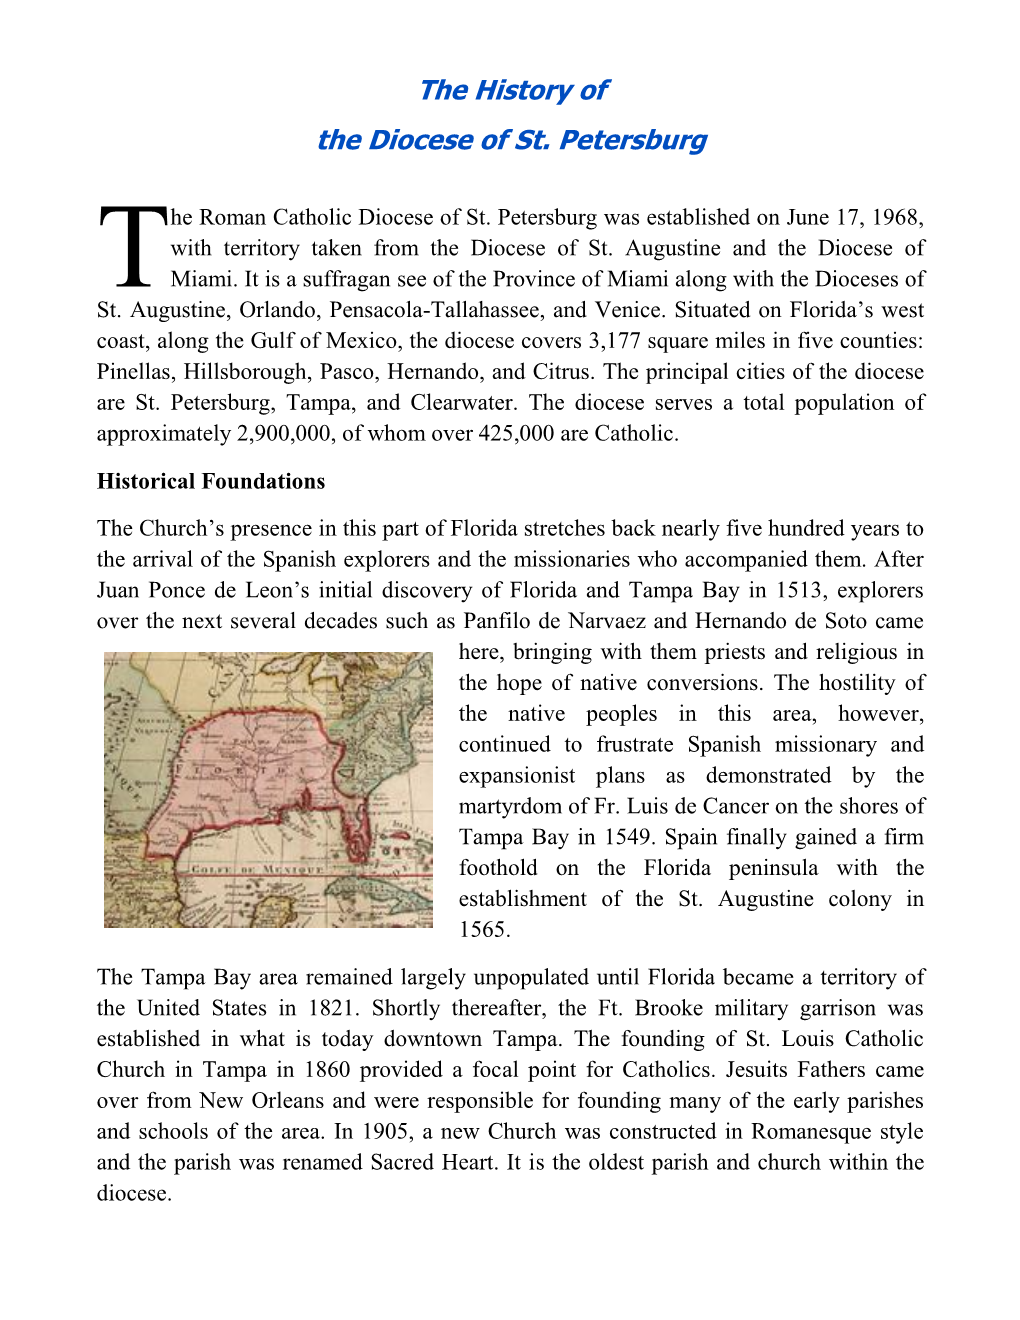 The History of the Diocese of St. Petersburg